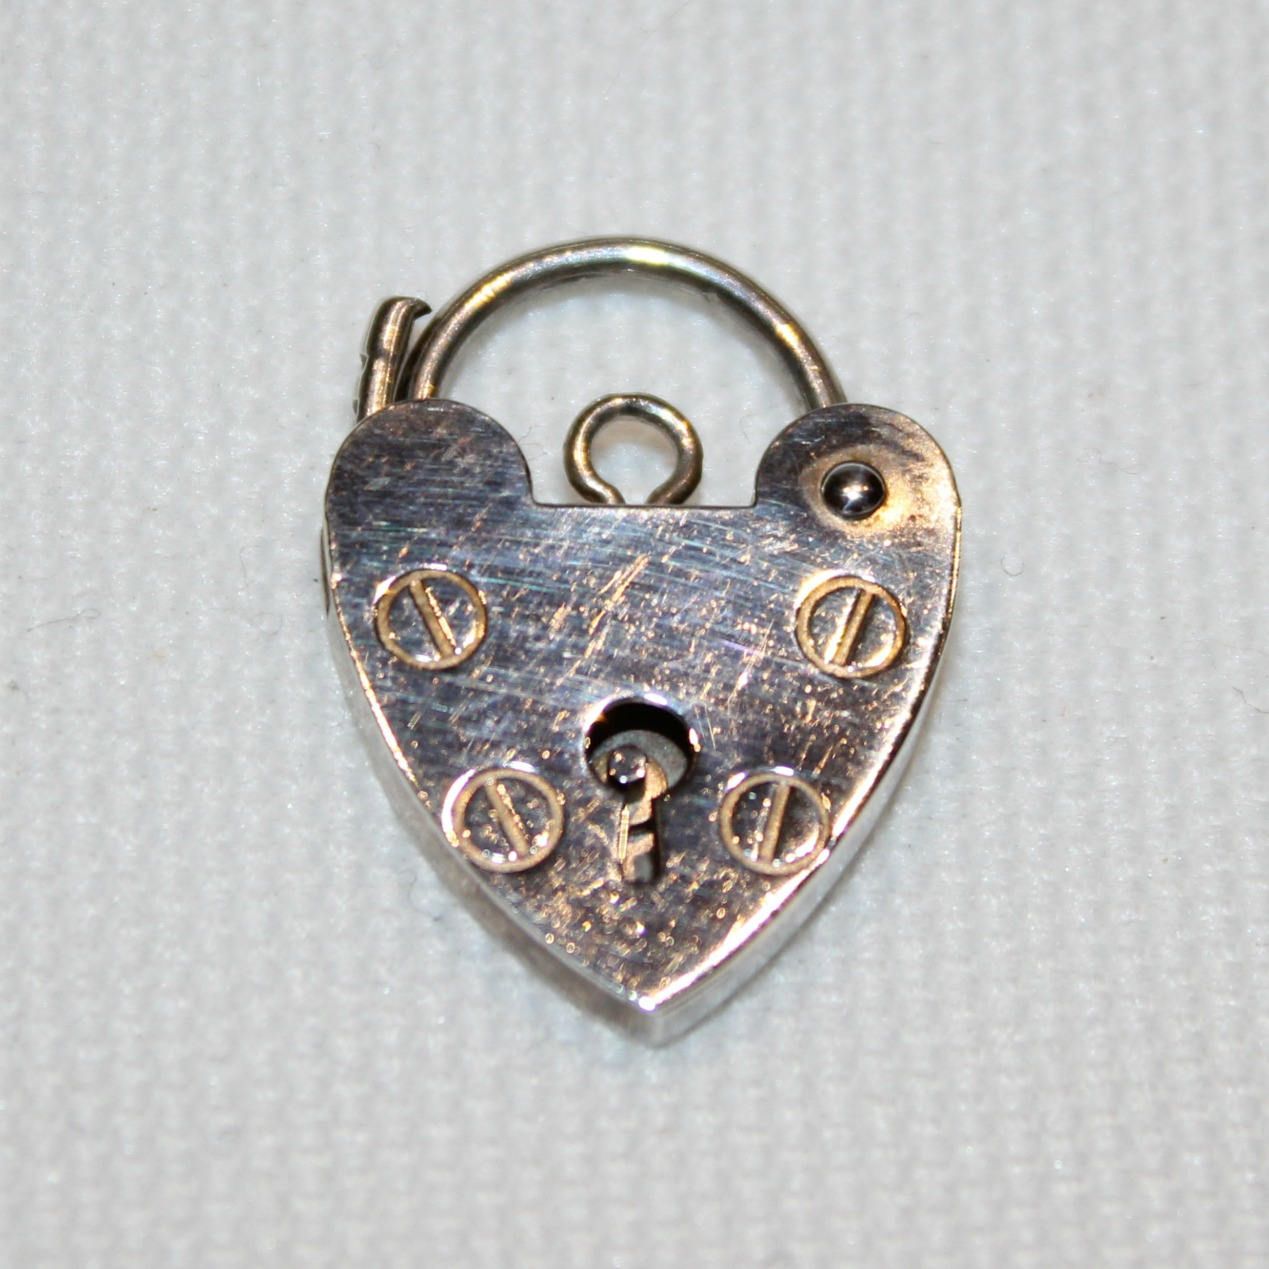 Sterling Silver Heart Padlock (suitable For A Bracelet) London 1990 Pertaining To Most Current Heart Shaped Padlock Rings (View 9 of 25)